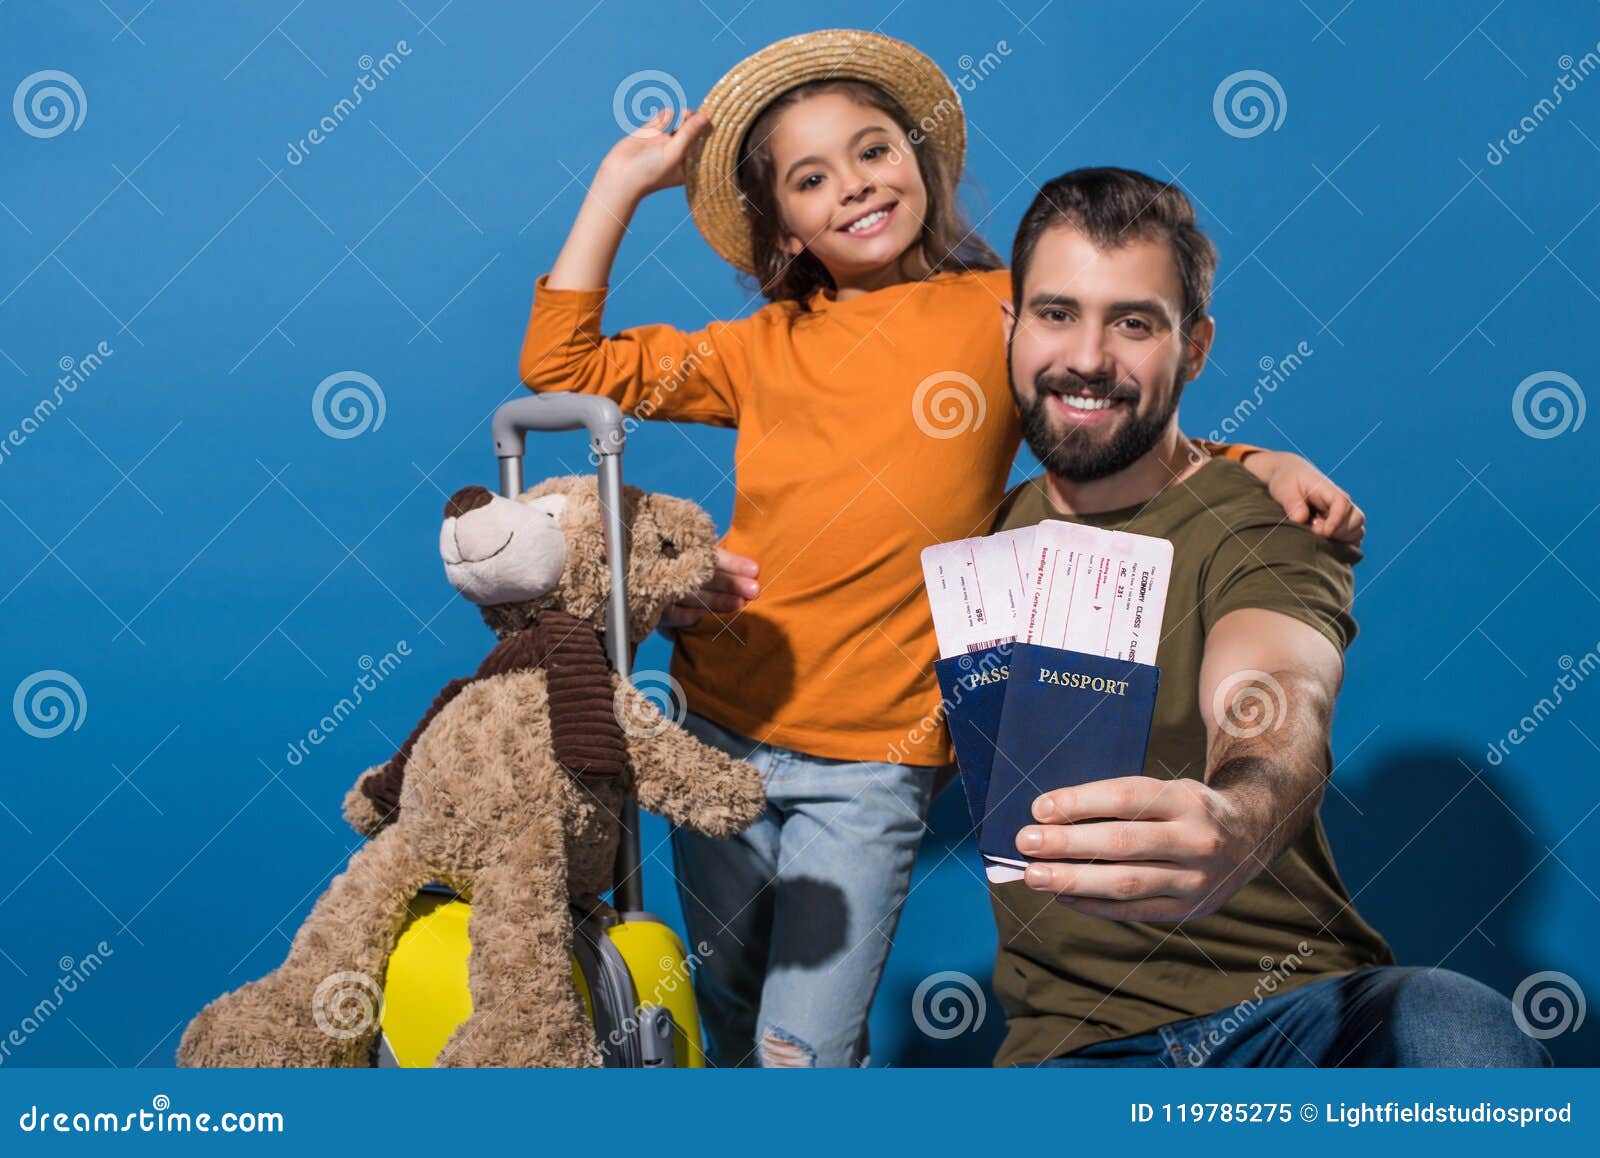 father and daughter with passports and tickets going on vacation